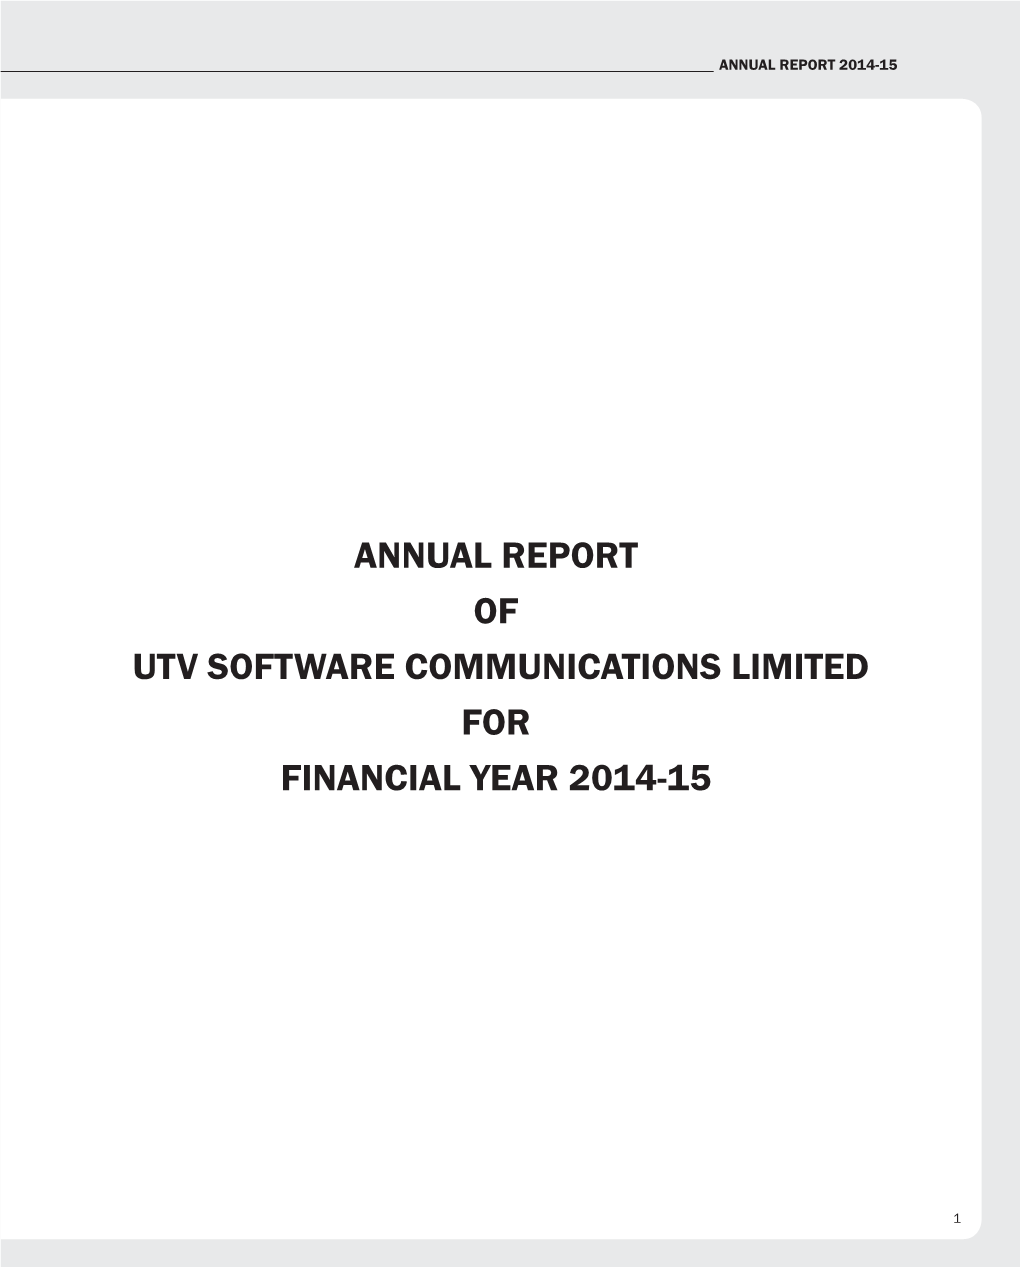 Annual Report of Utv Software Communications Limited for Financial Year 2014-15